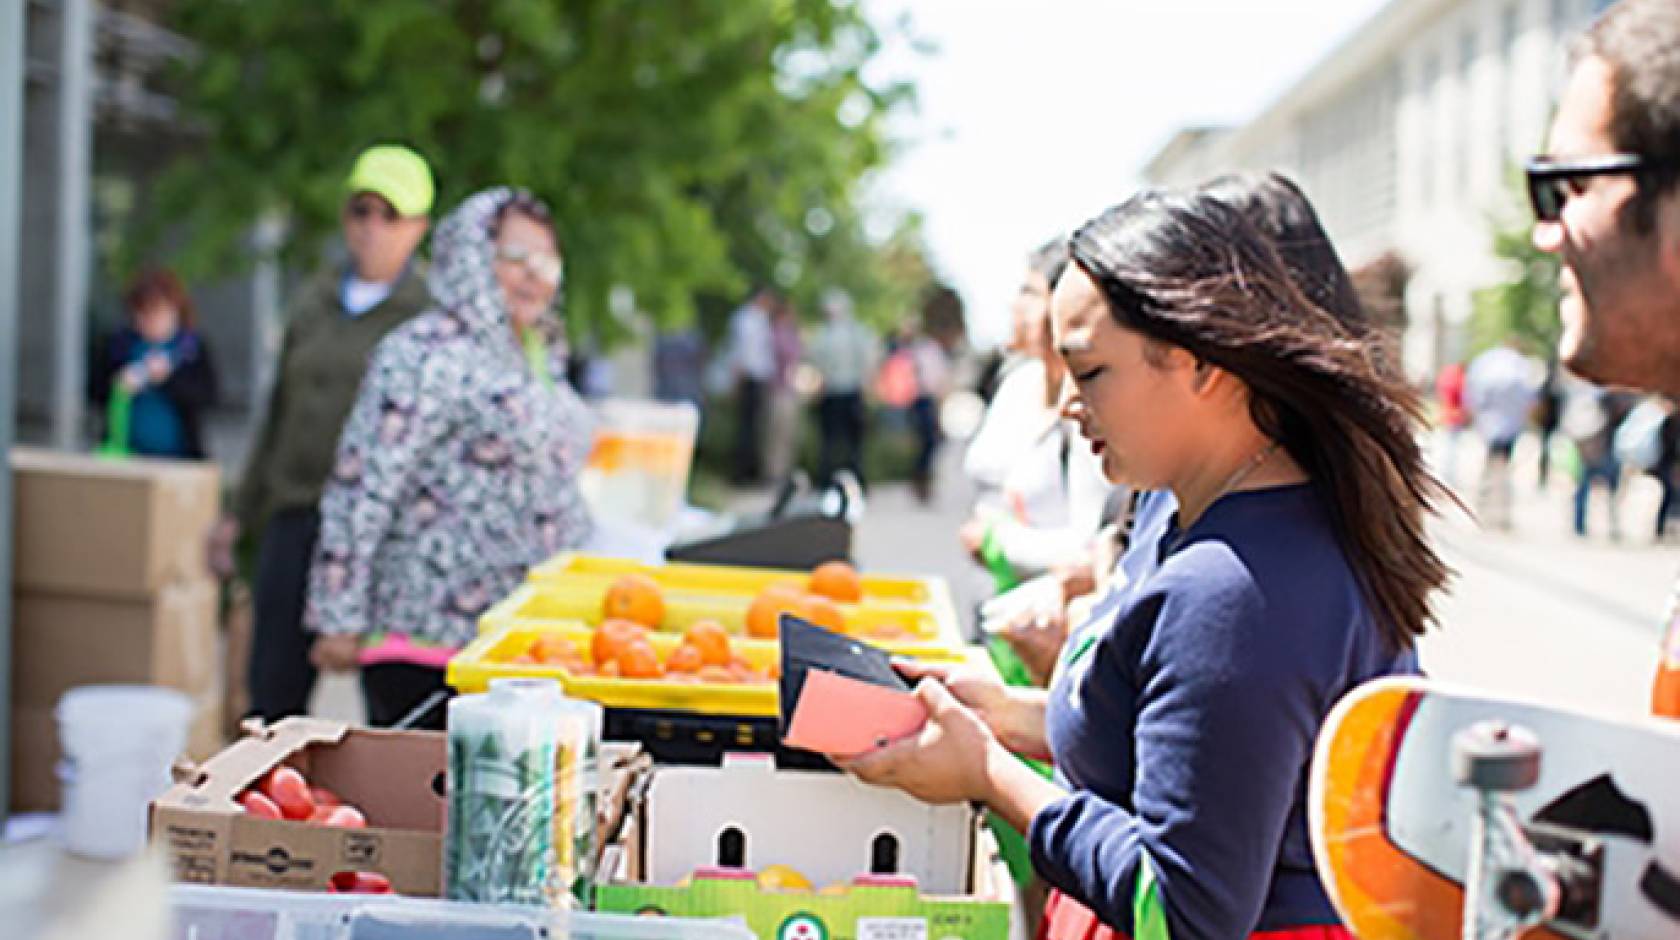 Everyone in the UC Merced community can get fresh produce from the farmers market truck that comes to campus each week.